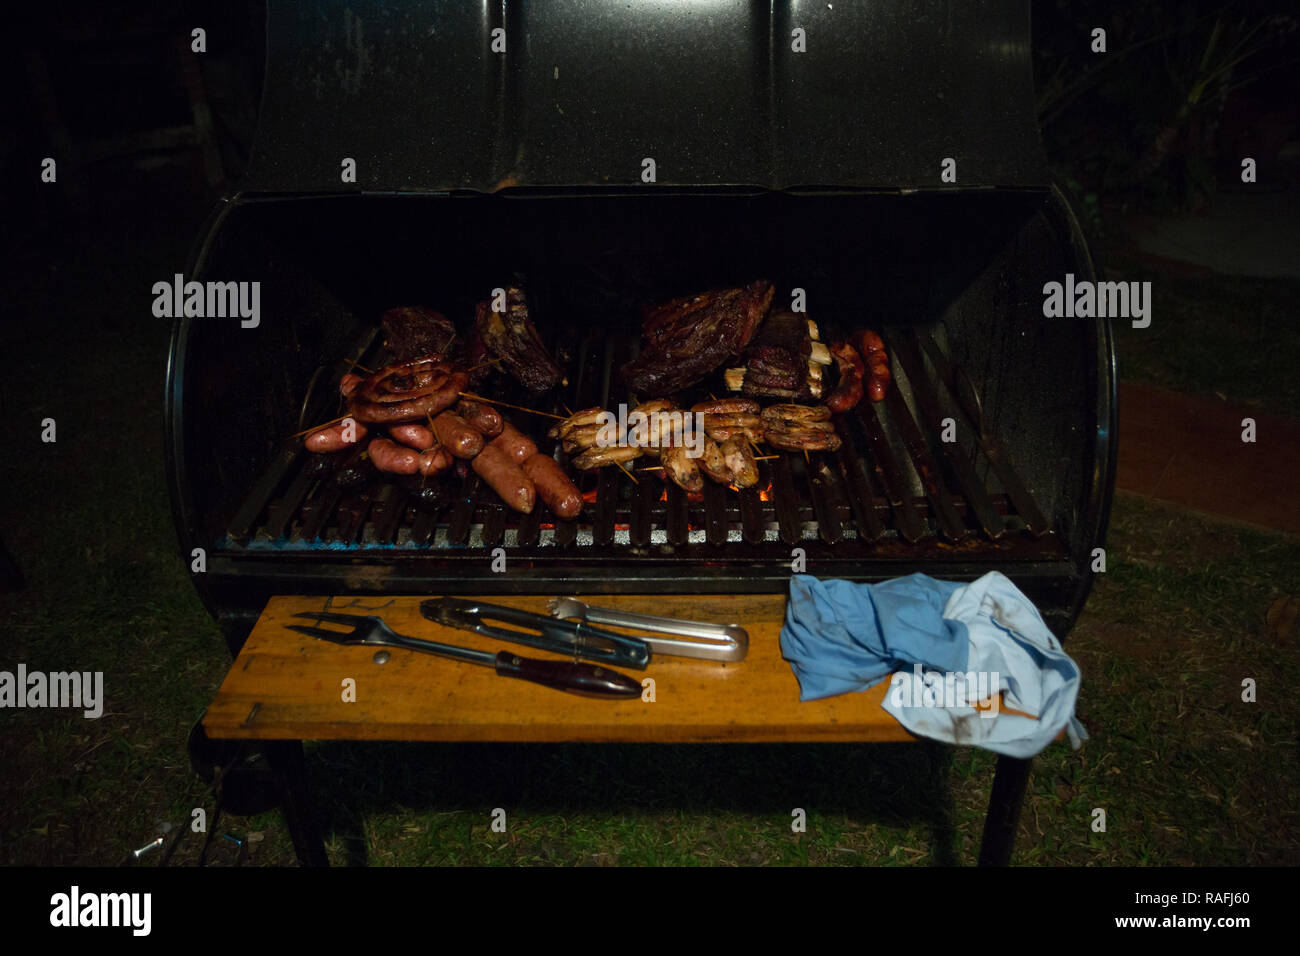 Homemade 'asado a la parrilla' (barbecue on the grill), on an outdoor 'parrilla  tambor' (tank grill) during Christmas Eve, Asuncion, Paraguay Stock Photo -  Alamy